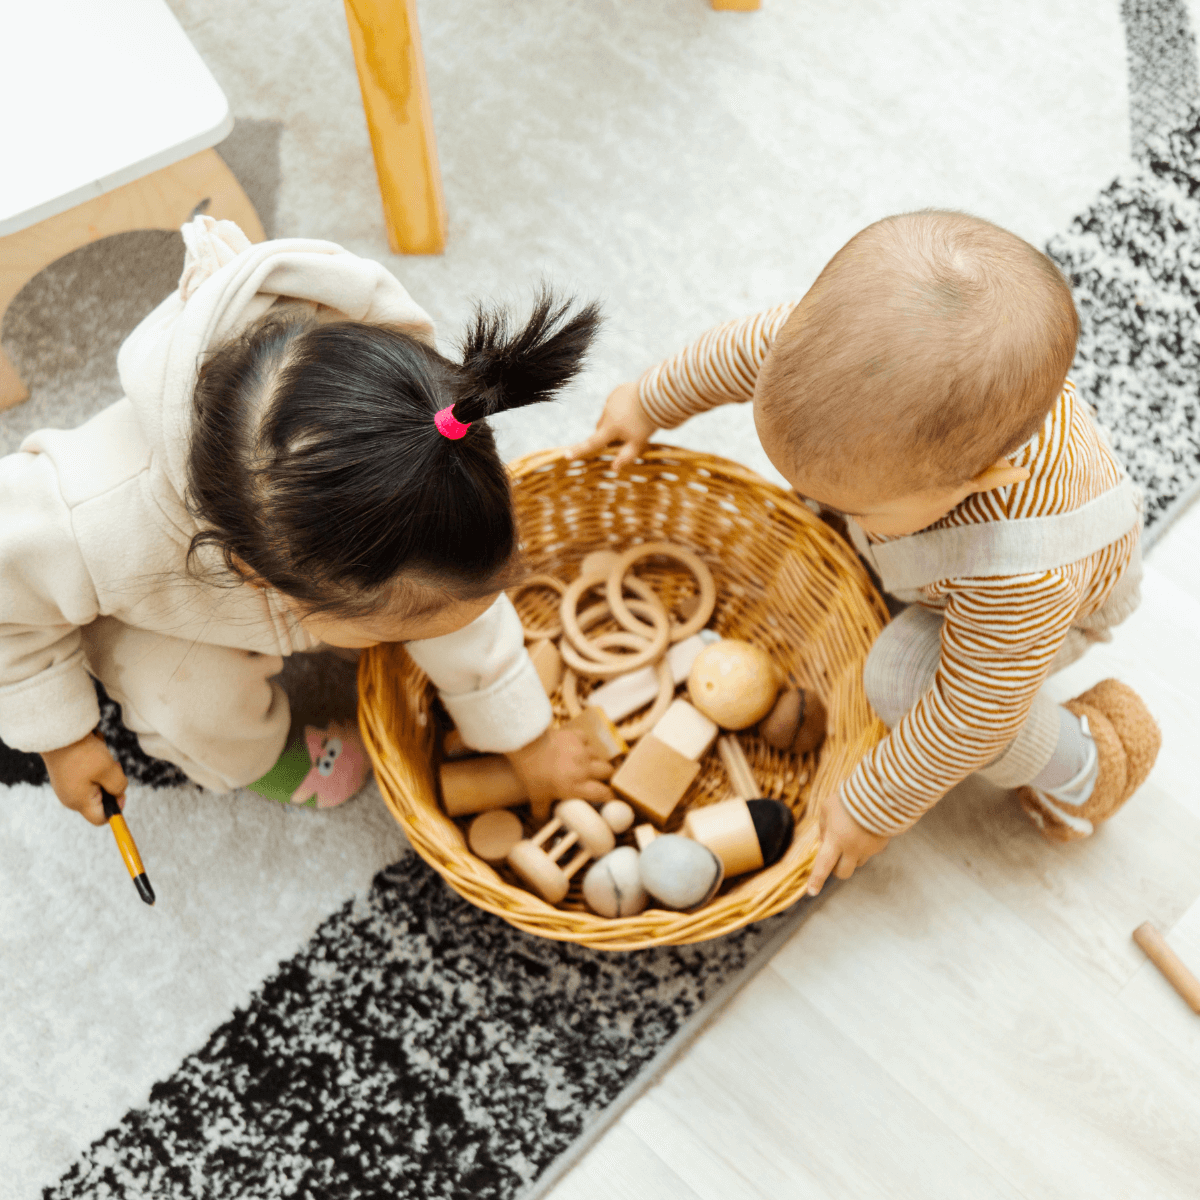 Best Montessori & Learning Toys for 1 Year Olds